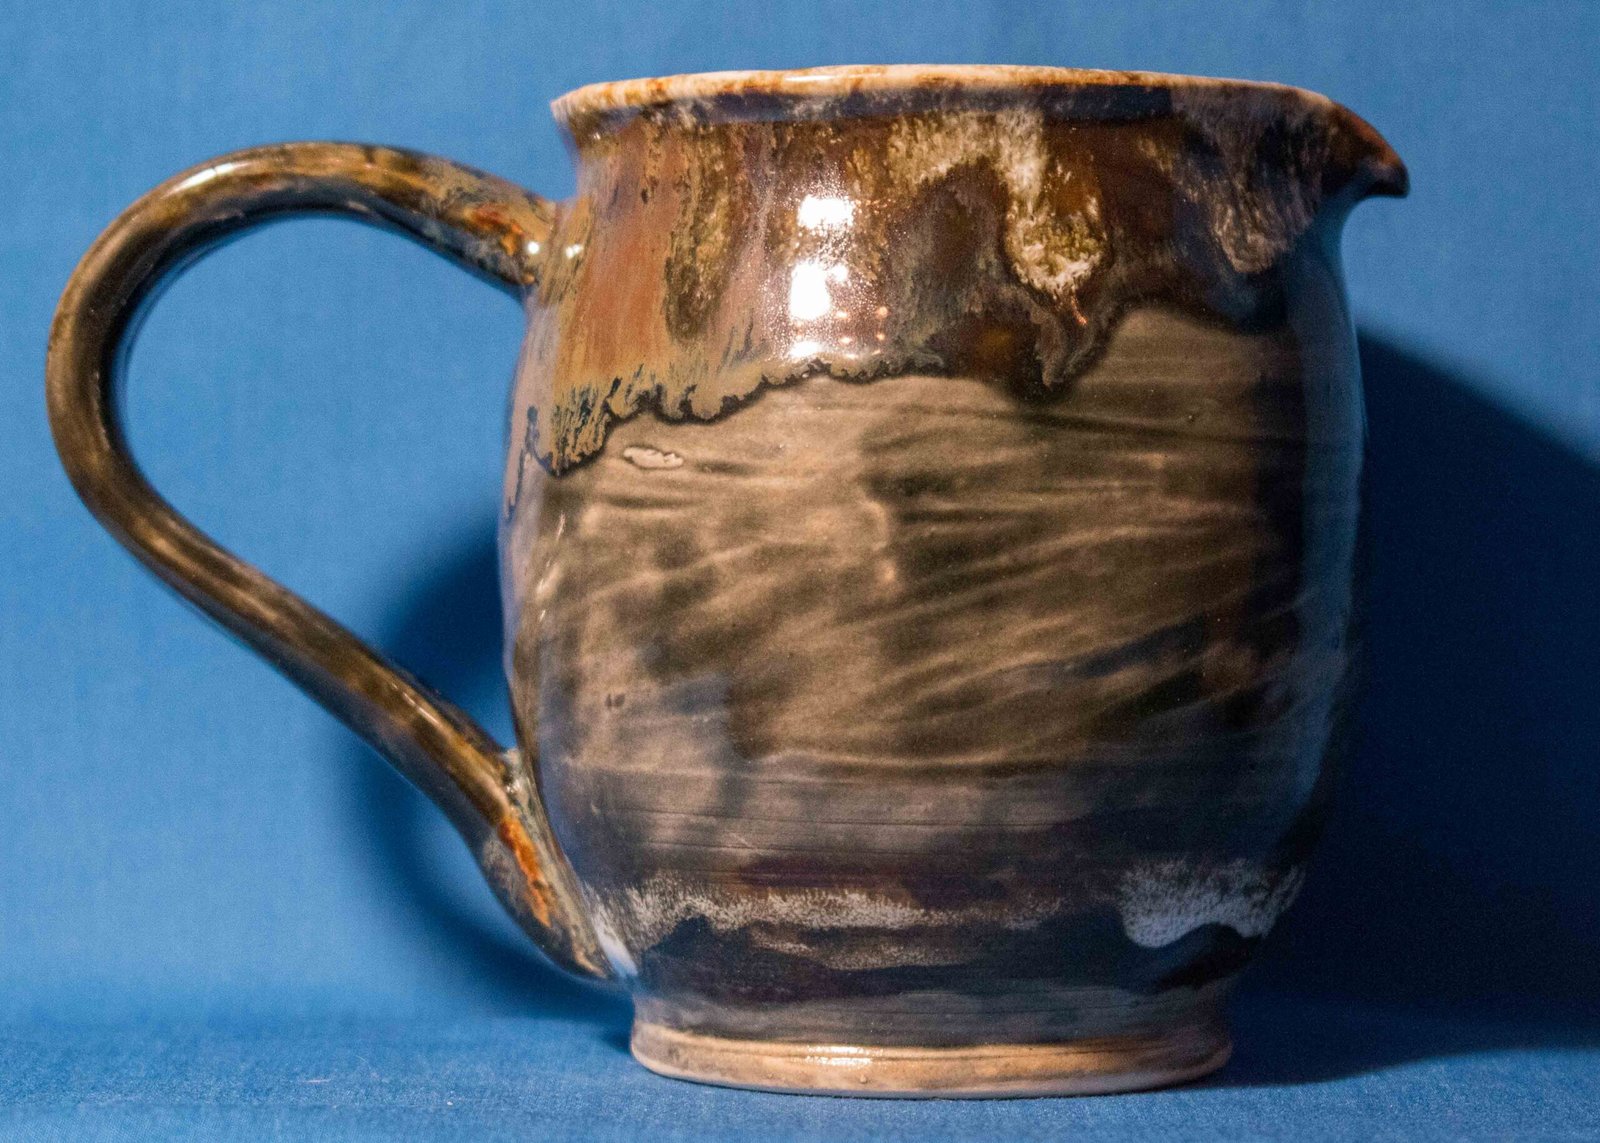 Rustic Patterned Pitcher